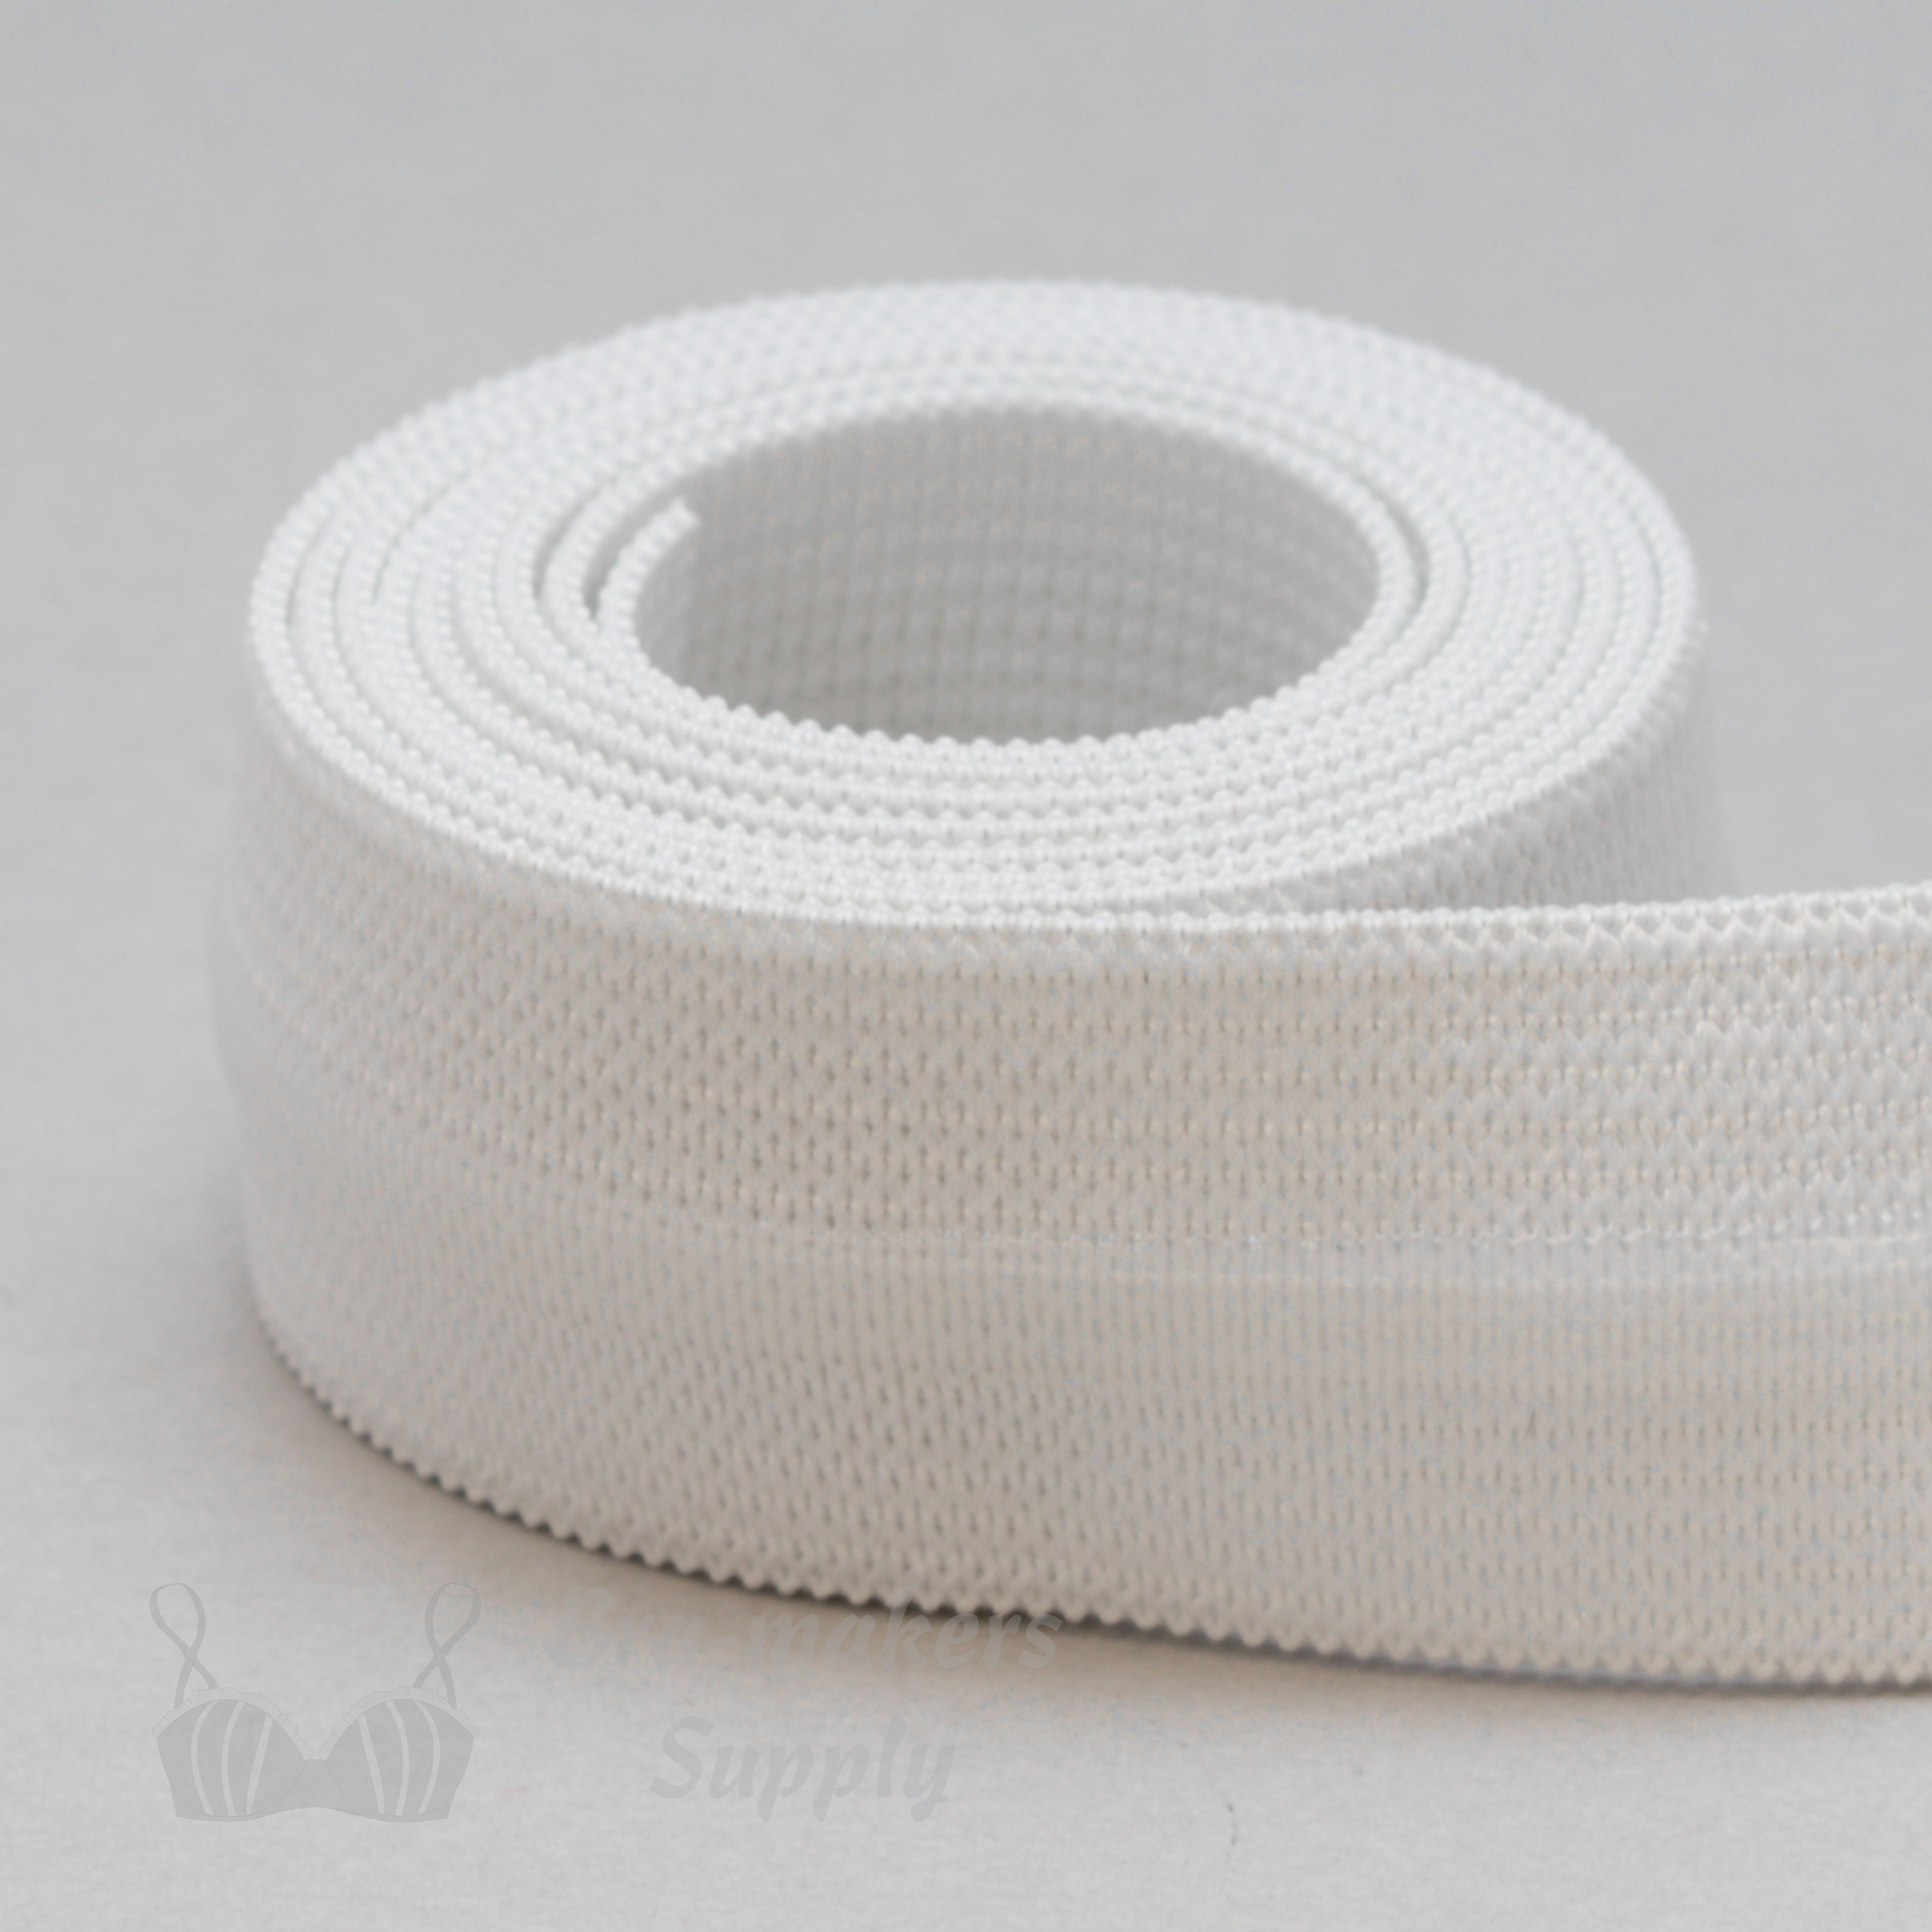 https://www.braandcorsetsupplies.com/wp-content/uploads/2016/07/one-inch-or-25-mm-silicone-gripper-elastic-EG-8-white-from-Bra-Makers-Supply-1-metre-roll-shown.jpg